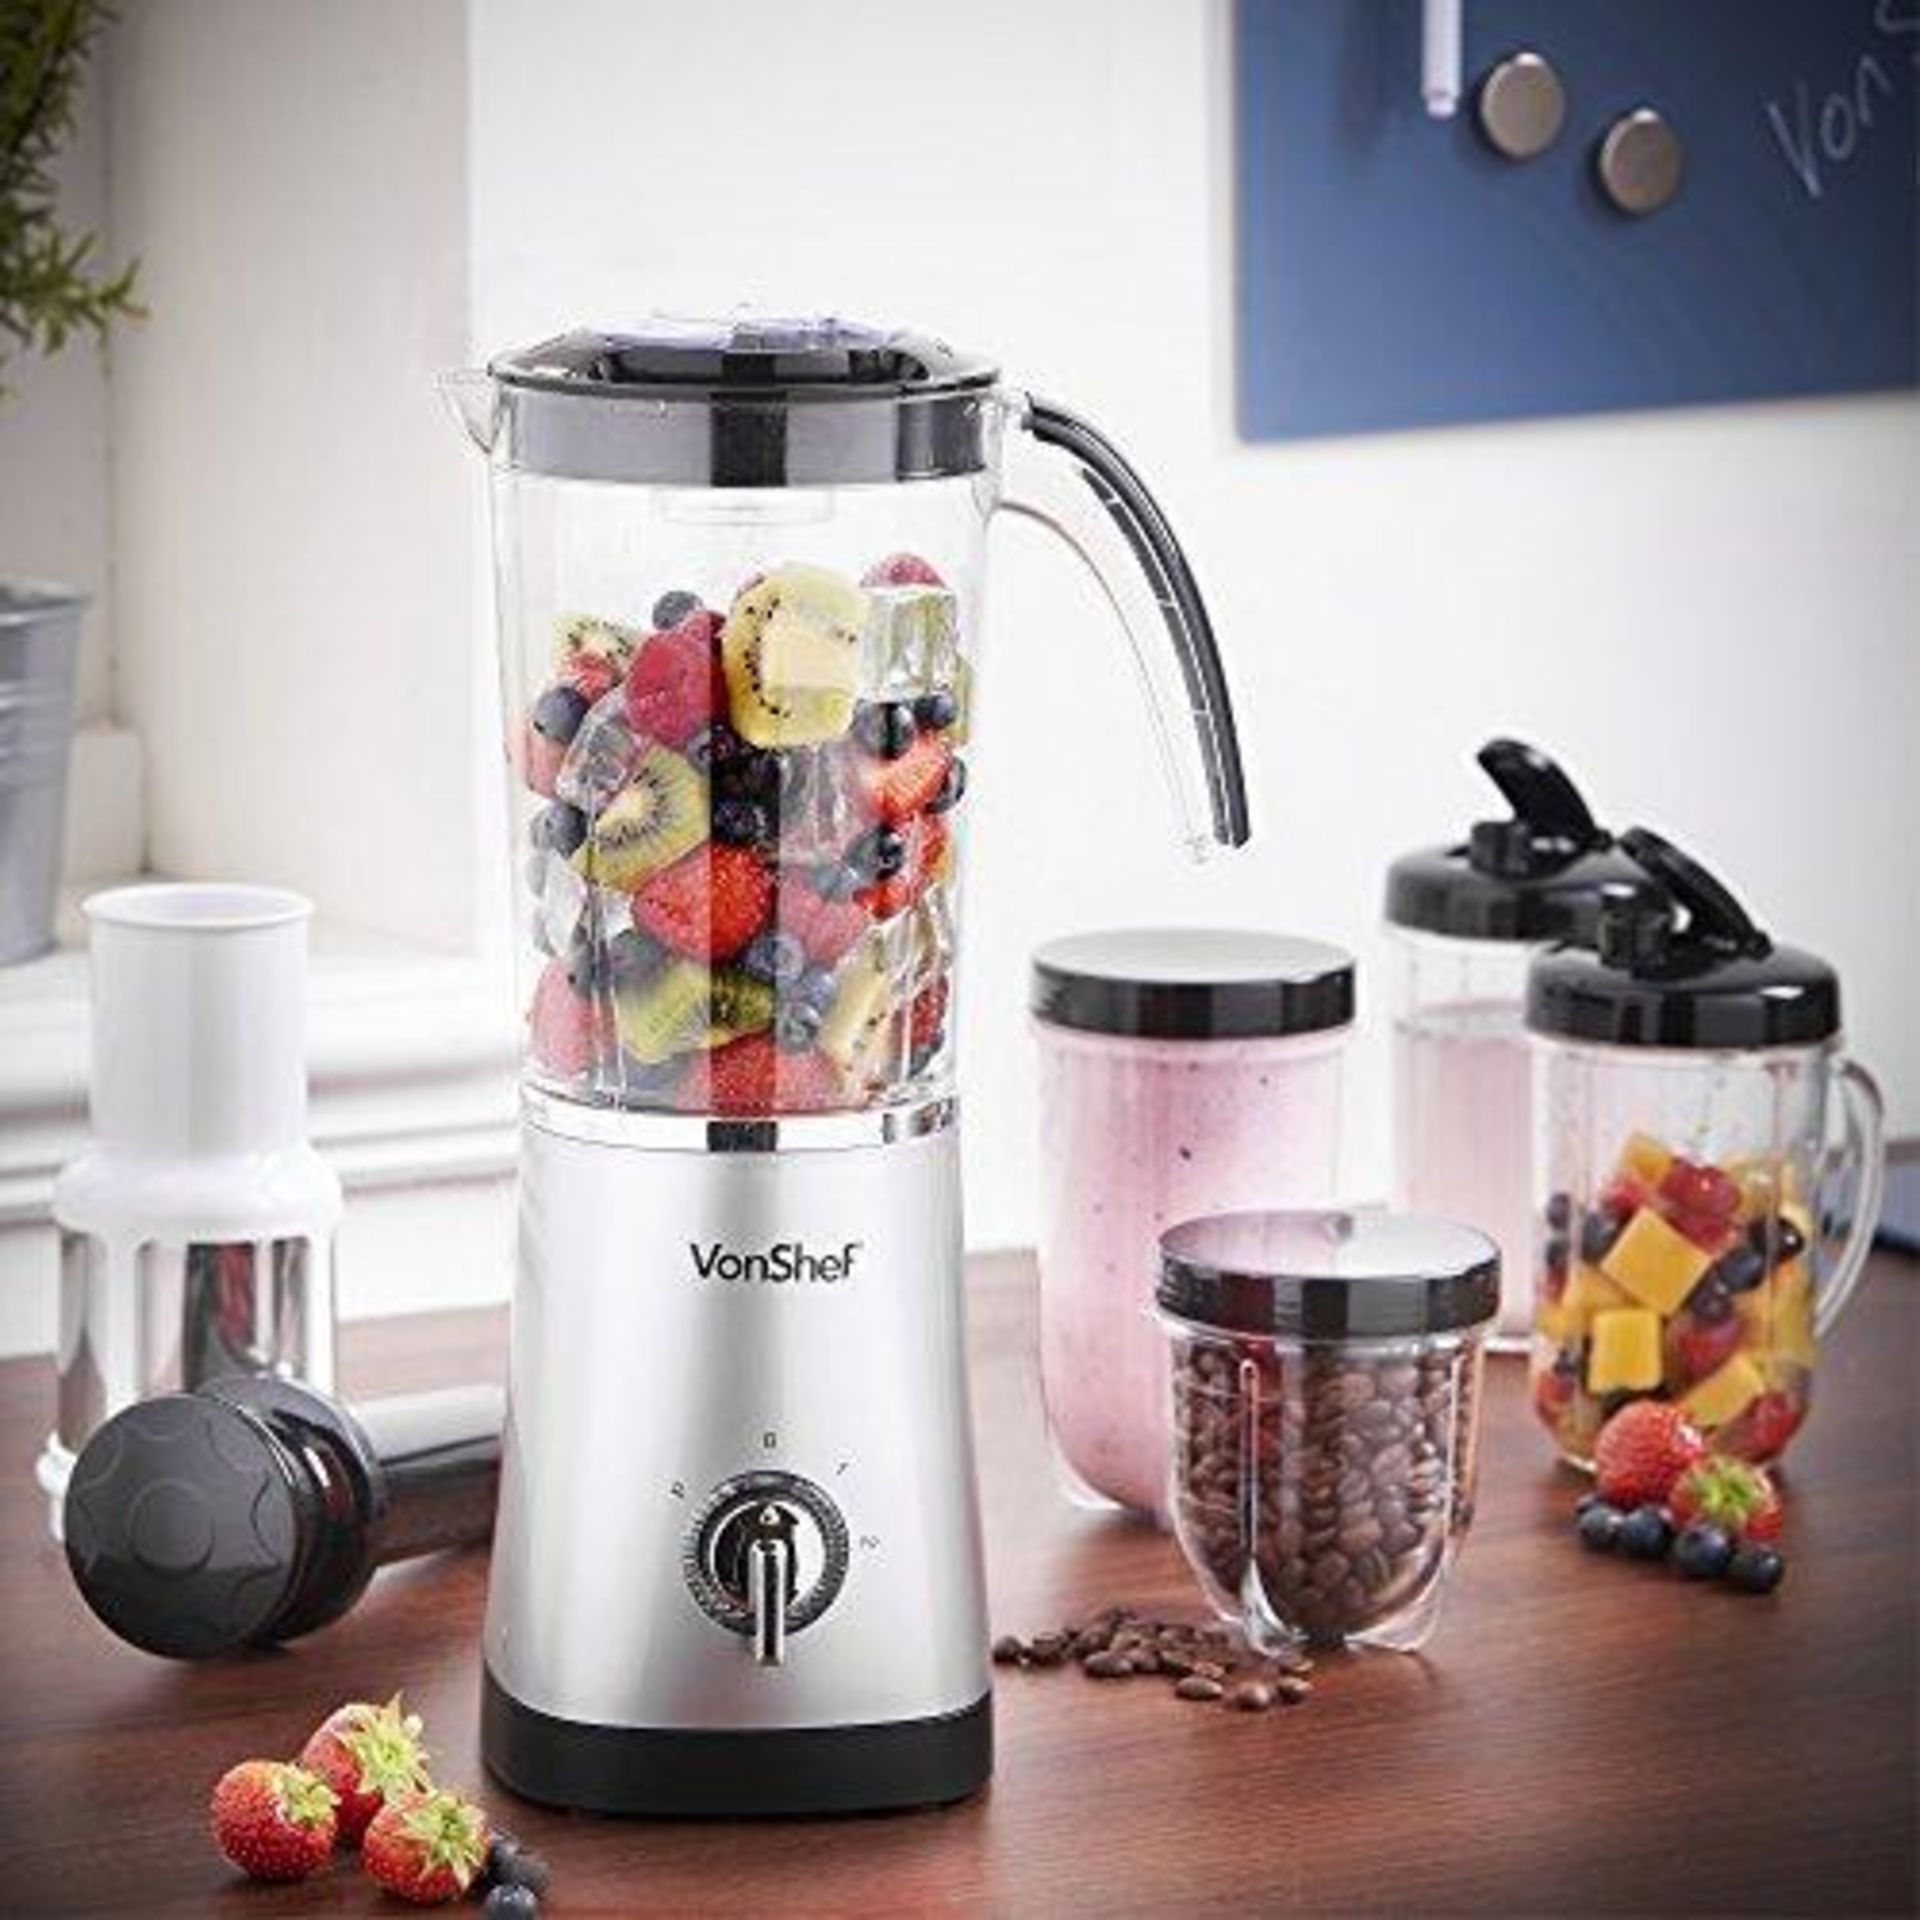 4-in-1 Blender - BI. 4-in-1 BlenderIncludes attachments for blending, grinding and juicing, as